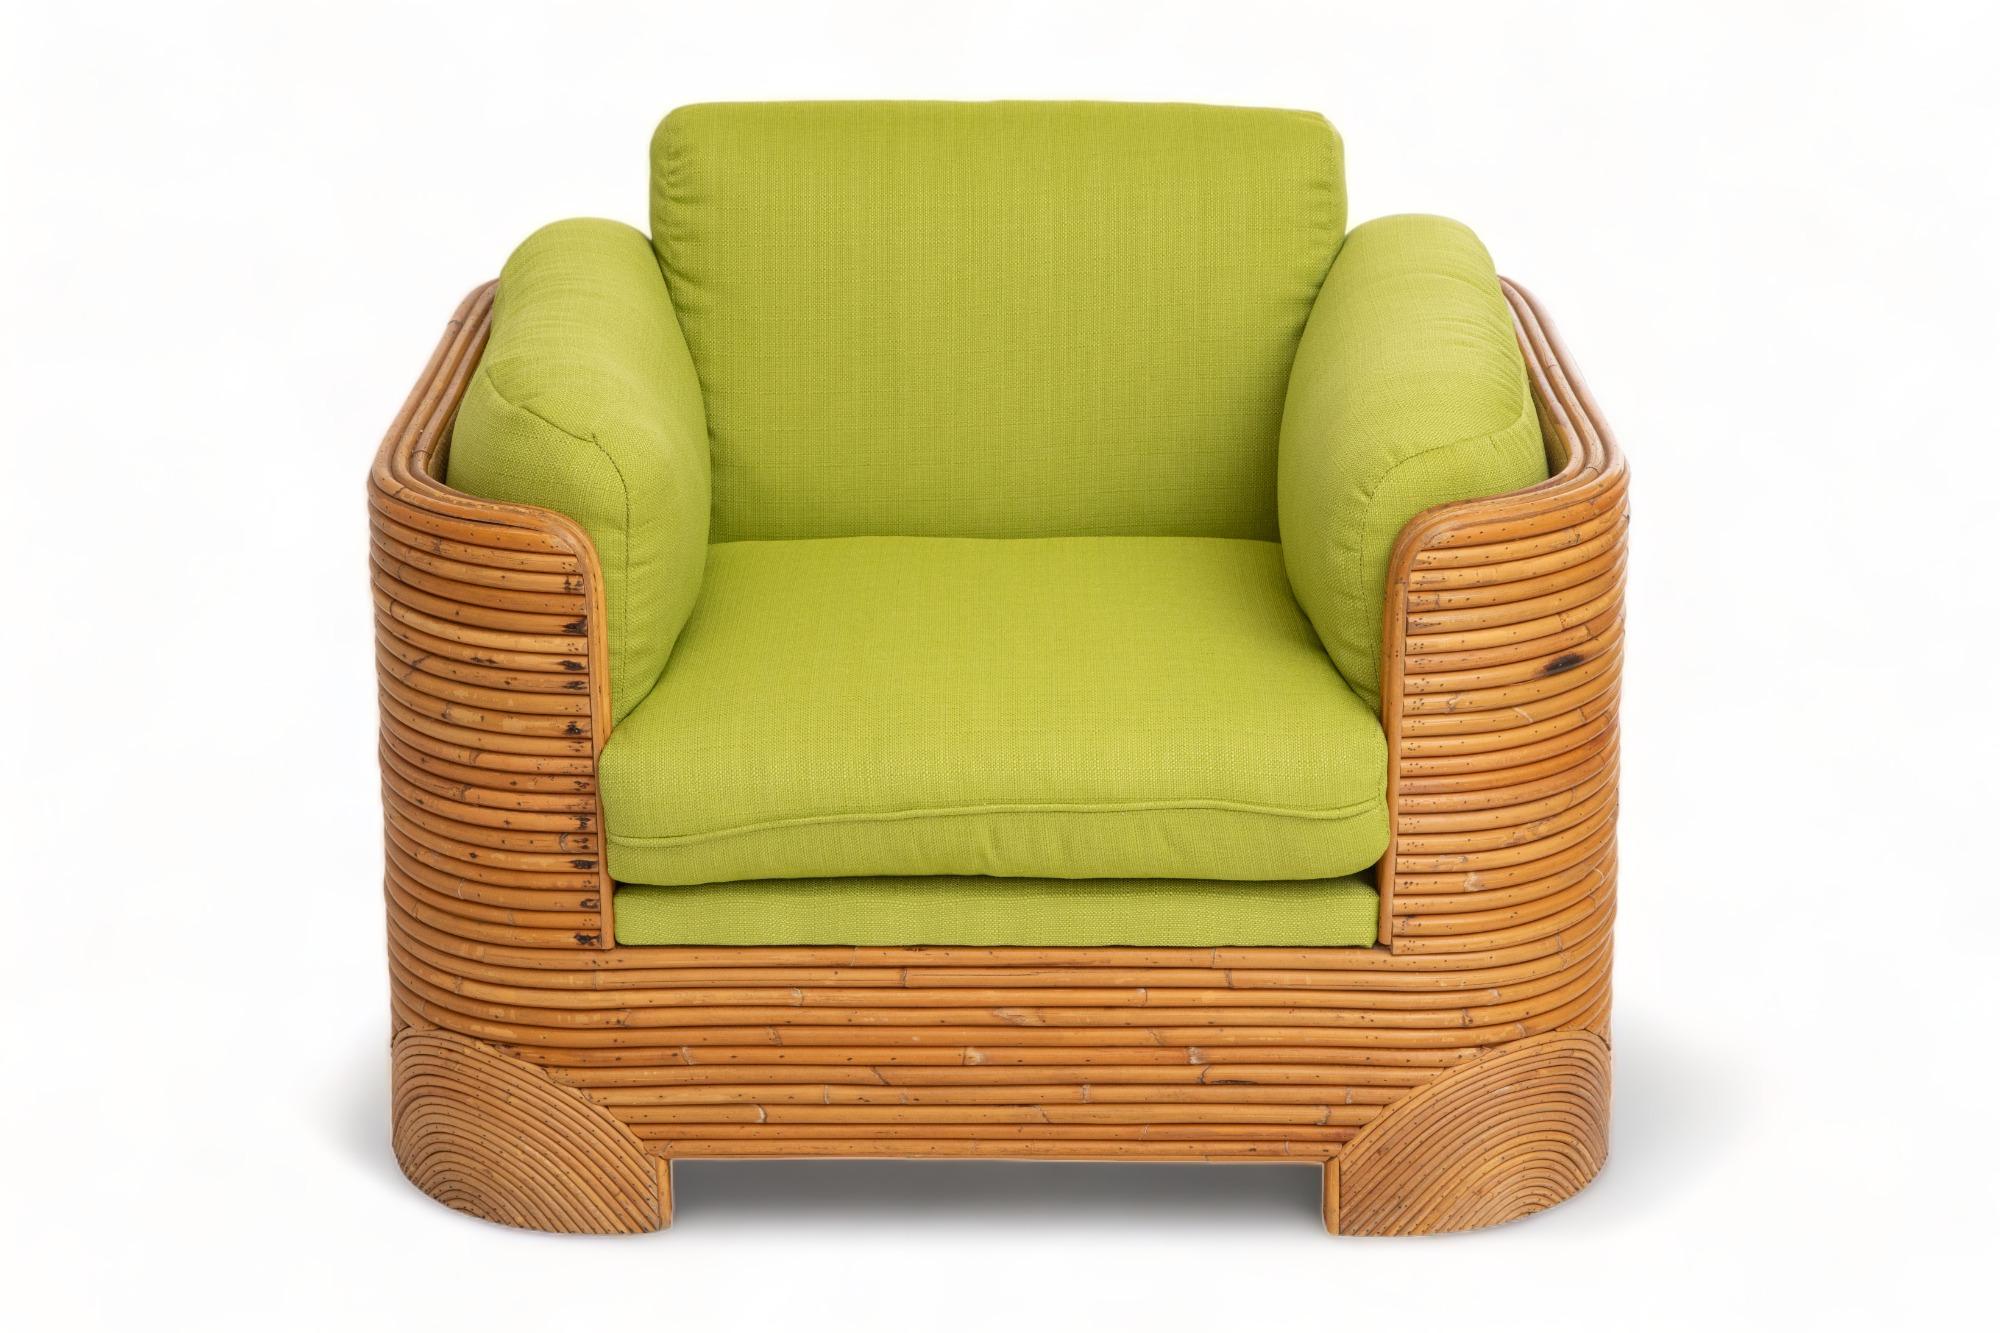 Single large split bamboo lounge chair, 
Circa 1970 USA
Generous proportion and curved lines
Newly upholstered in chartreuse fabric
Bamboo retains a warm original patina
